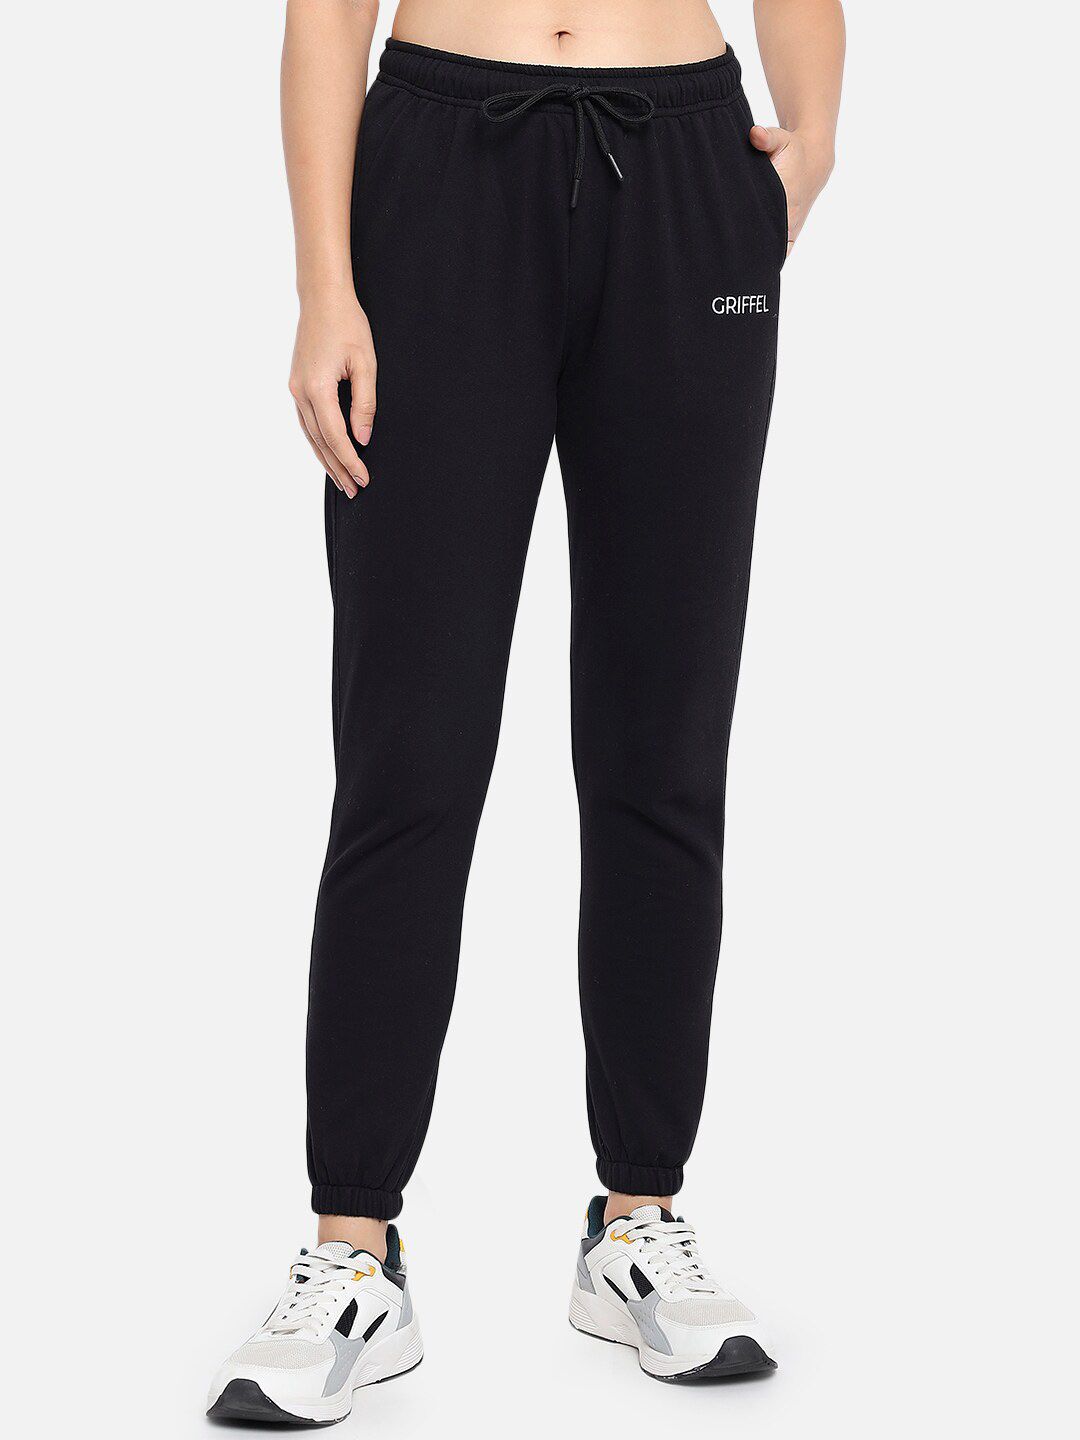 GRIFFEL Women Black Solid Cotton Sports Joggers Price in India